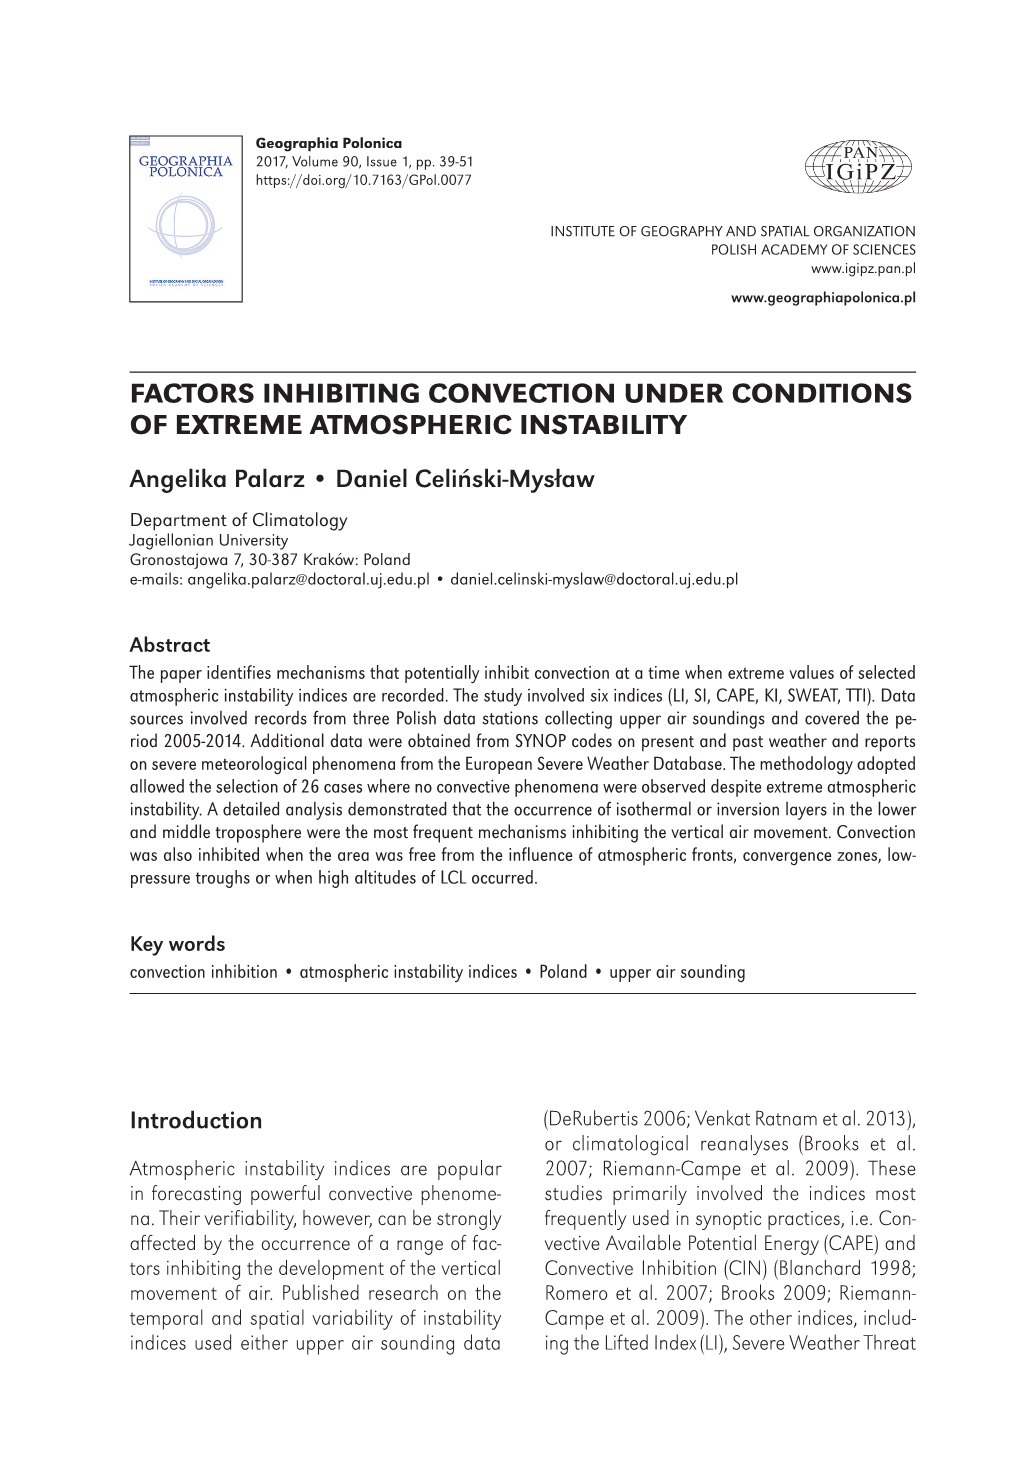 Factors Inhibiting Convection Under Conditions of Extreme Atmospheric Instability